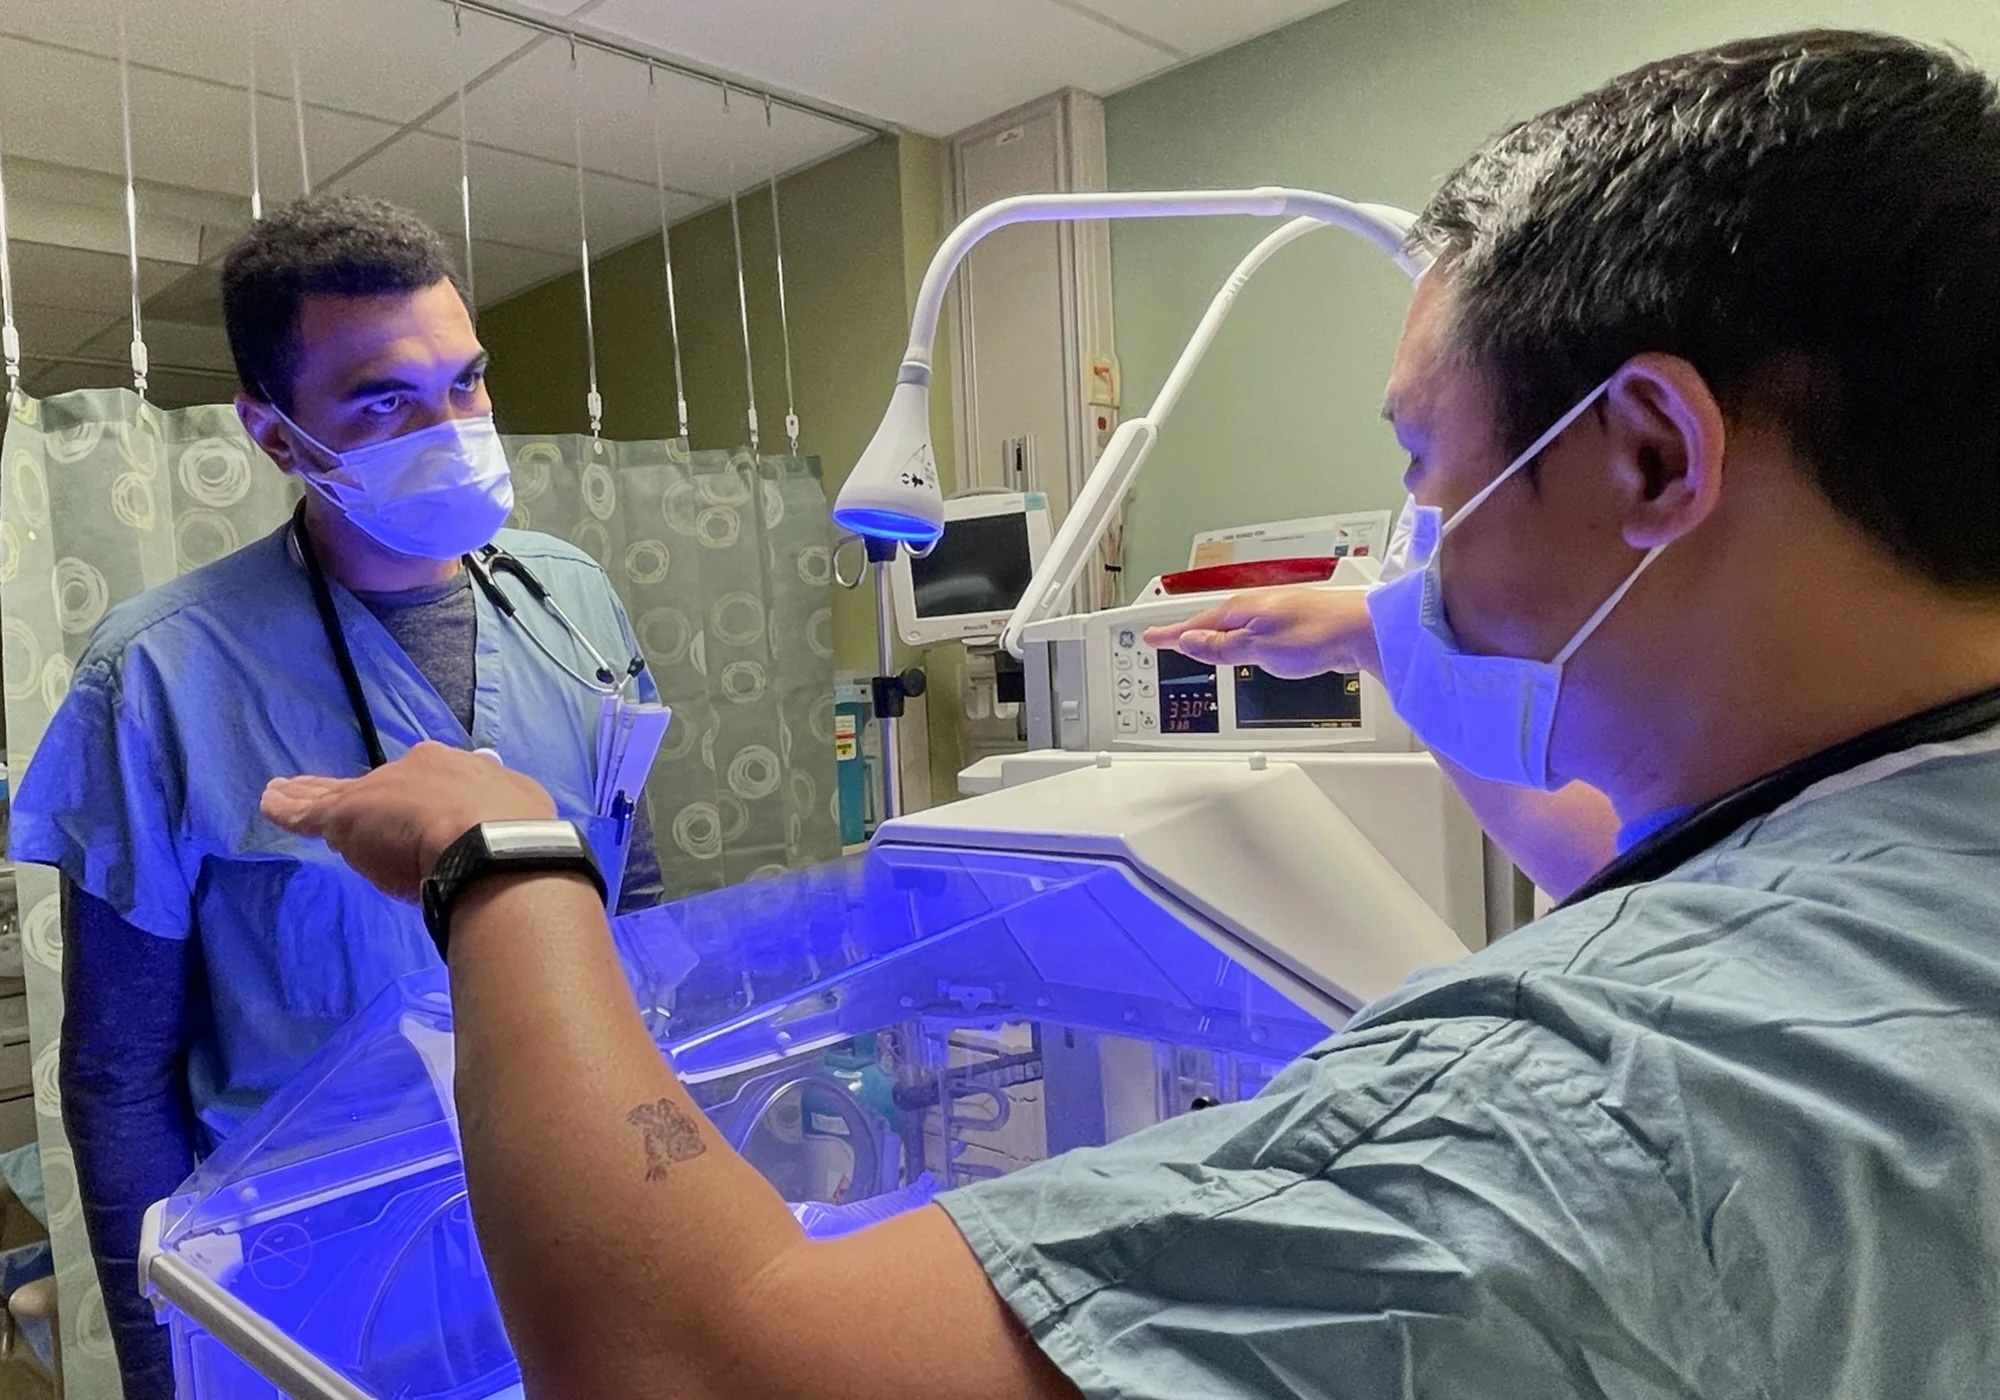 Two men in scrubs and face masks work in a hospital ward, lit with blue light from an instrument